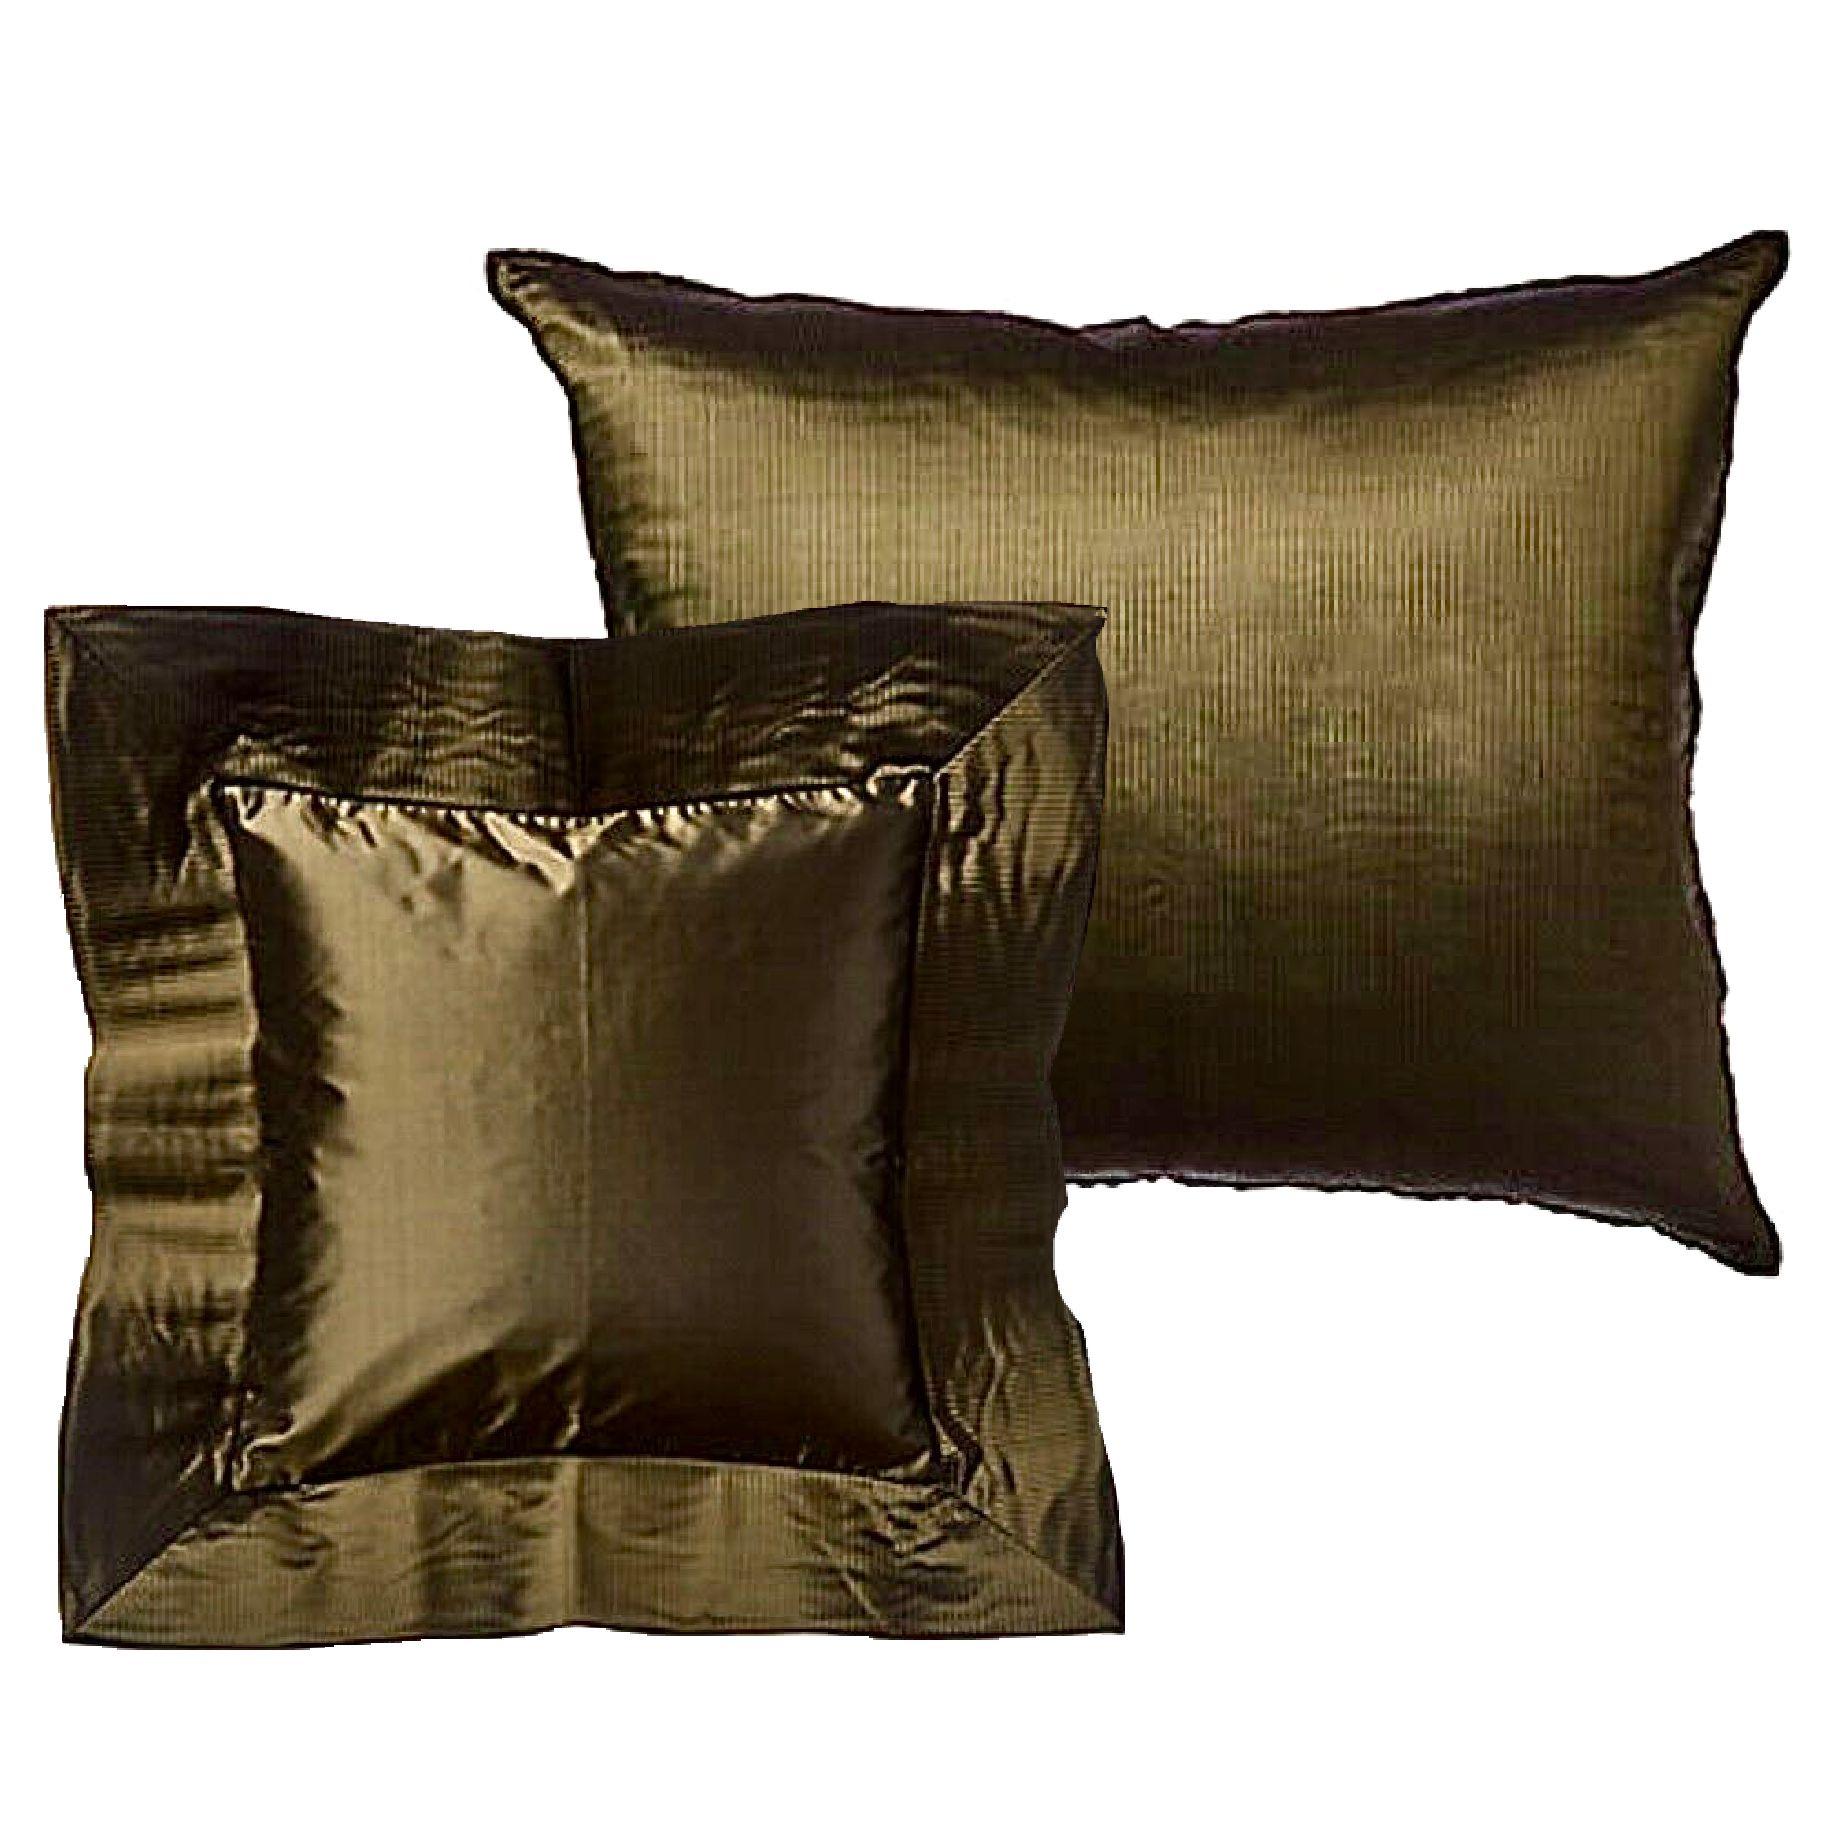 Rich bronze Origami pleated silk pillow sham pair, square and rectangular, with zip. Square sham has large pleated flange. Square fits 14 x 14”. Rectangle: 18 x 22”.